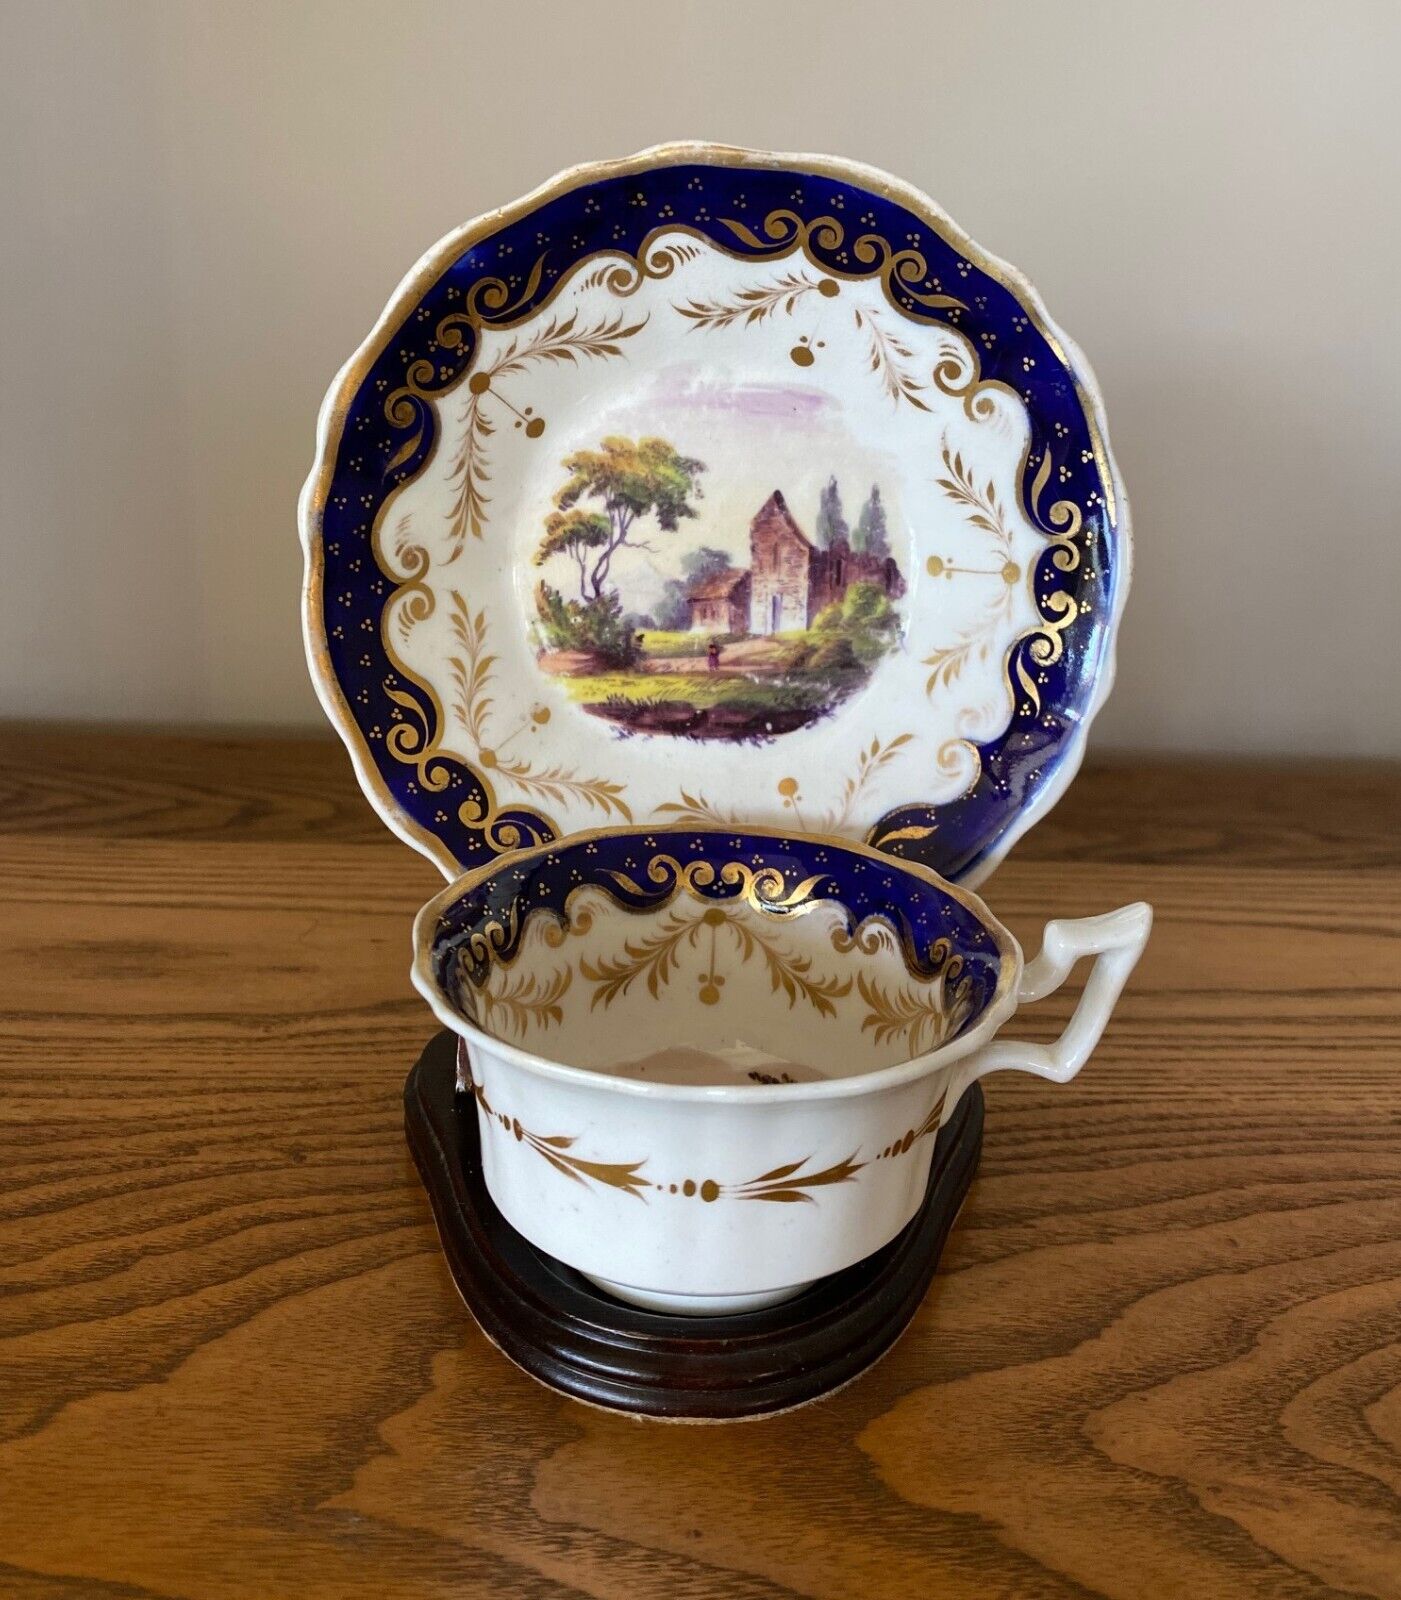 Antique Ridgway Porcelain Topographical Teacup and Saucer - Pattern 771